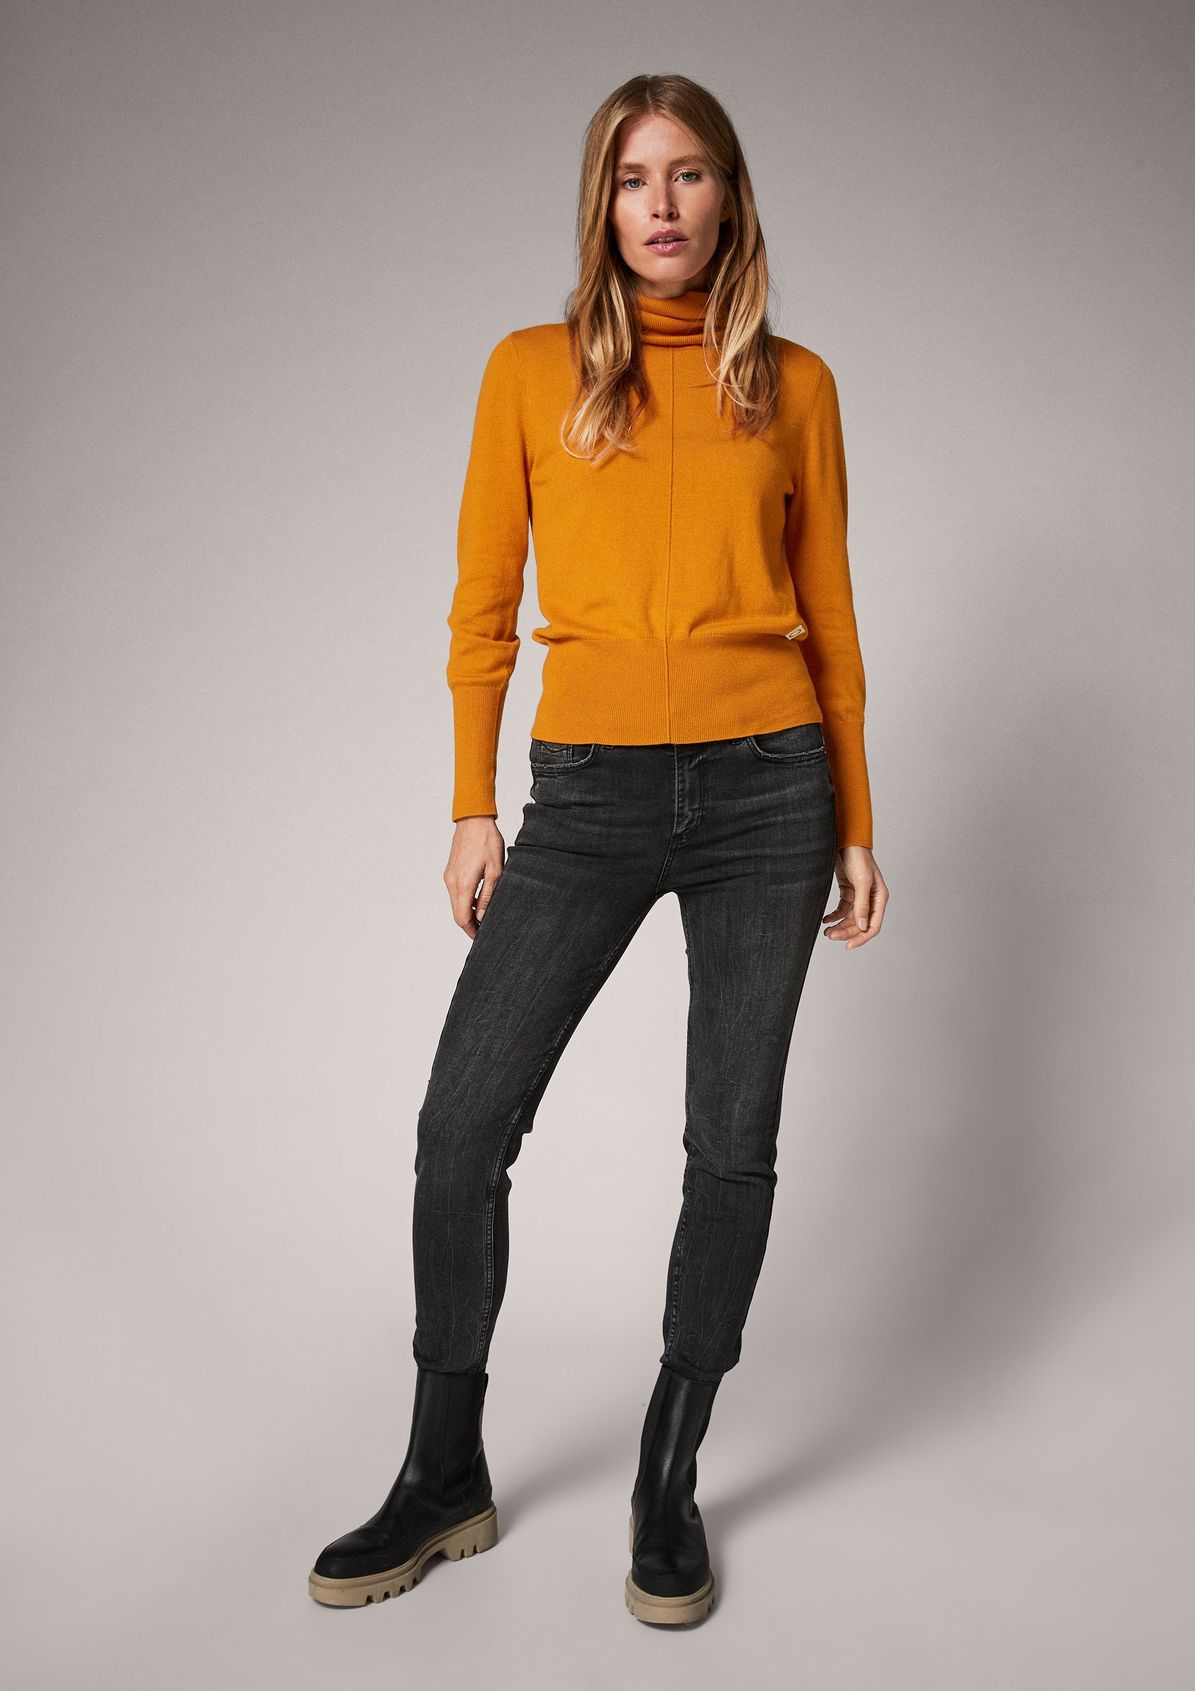 Jumper with a percentage of cashmere from comma